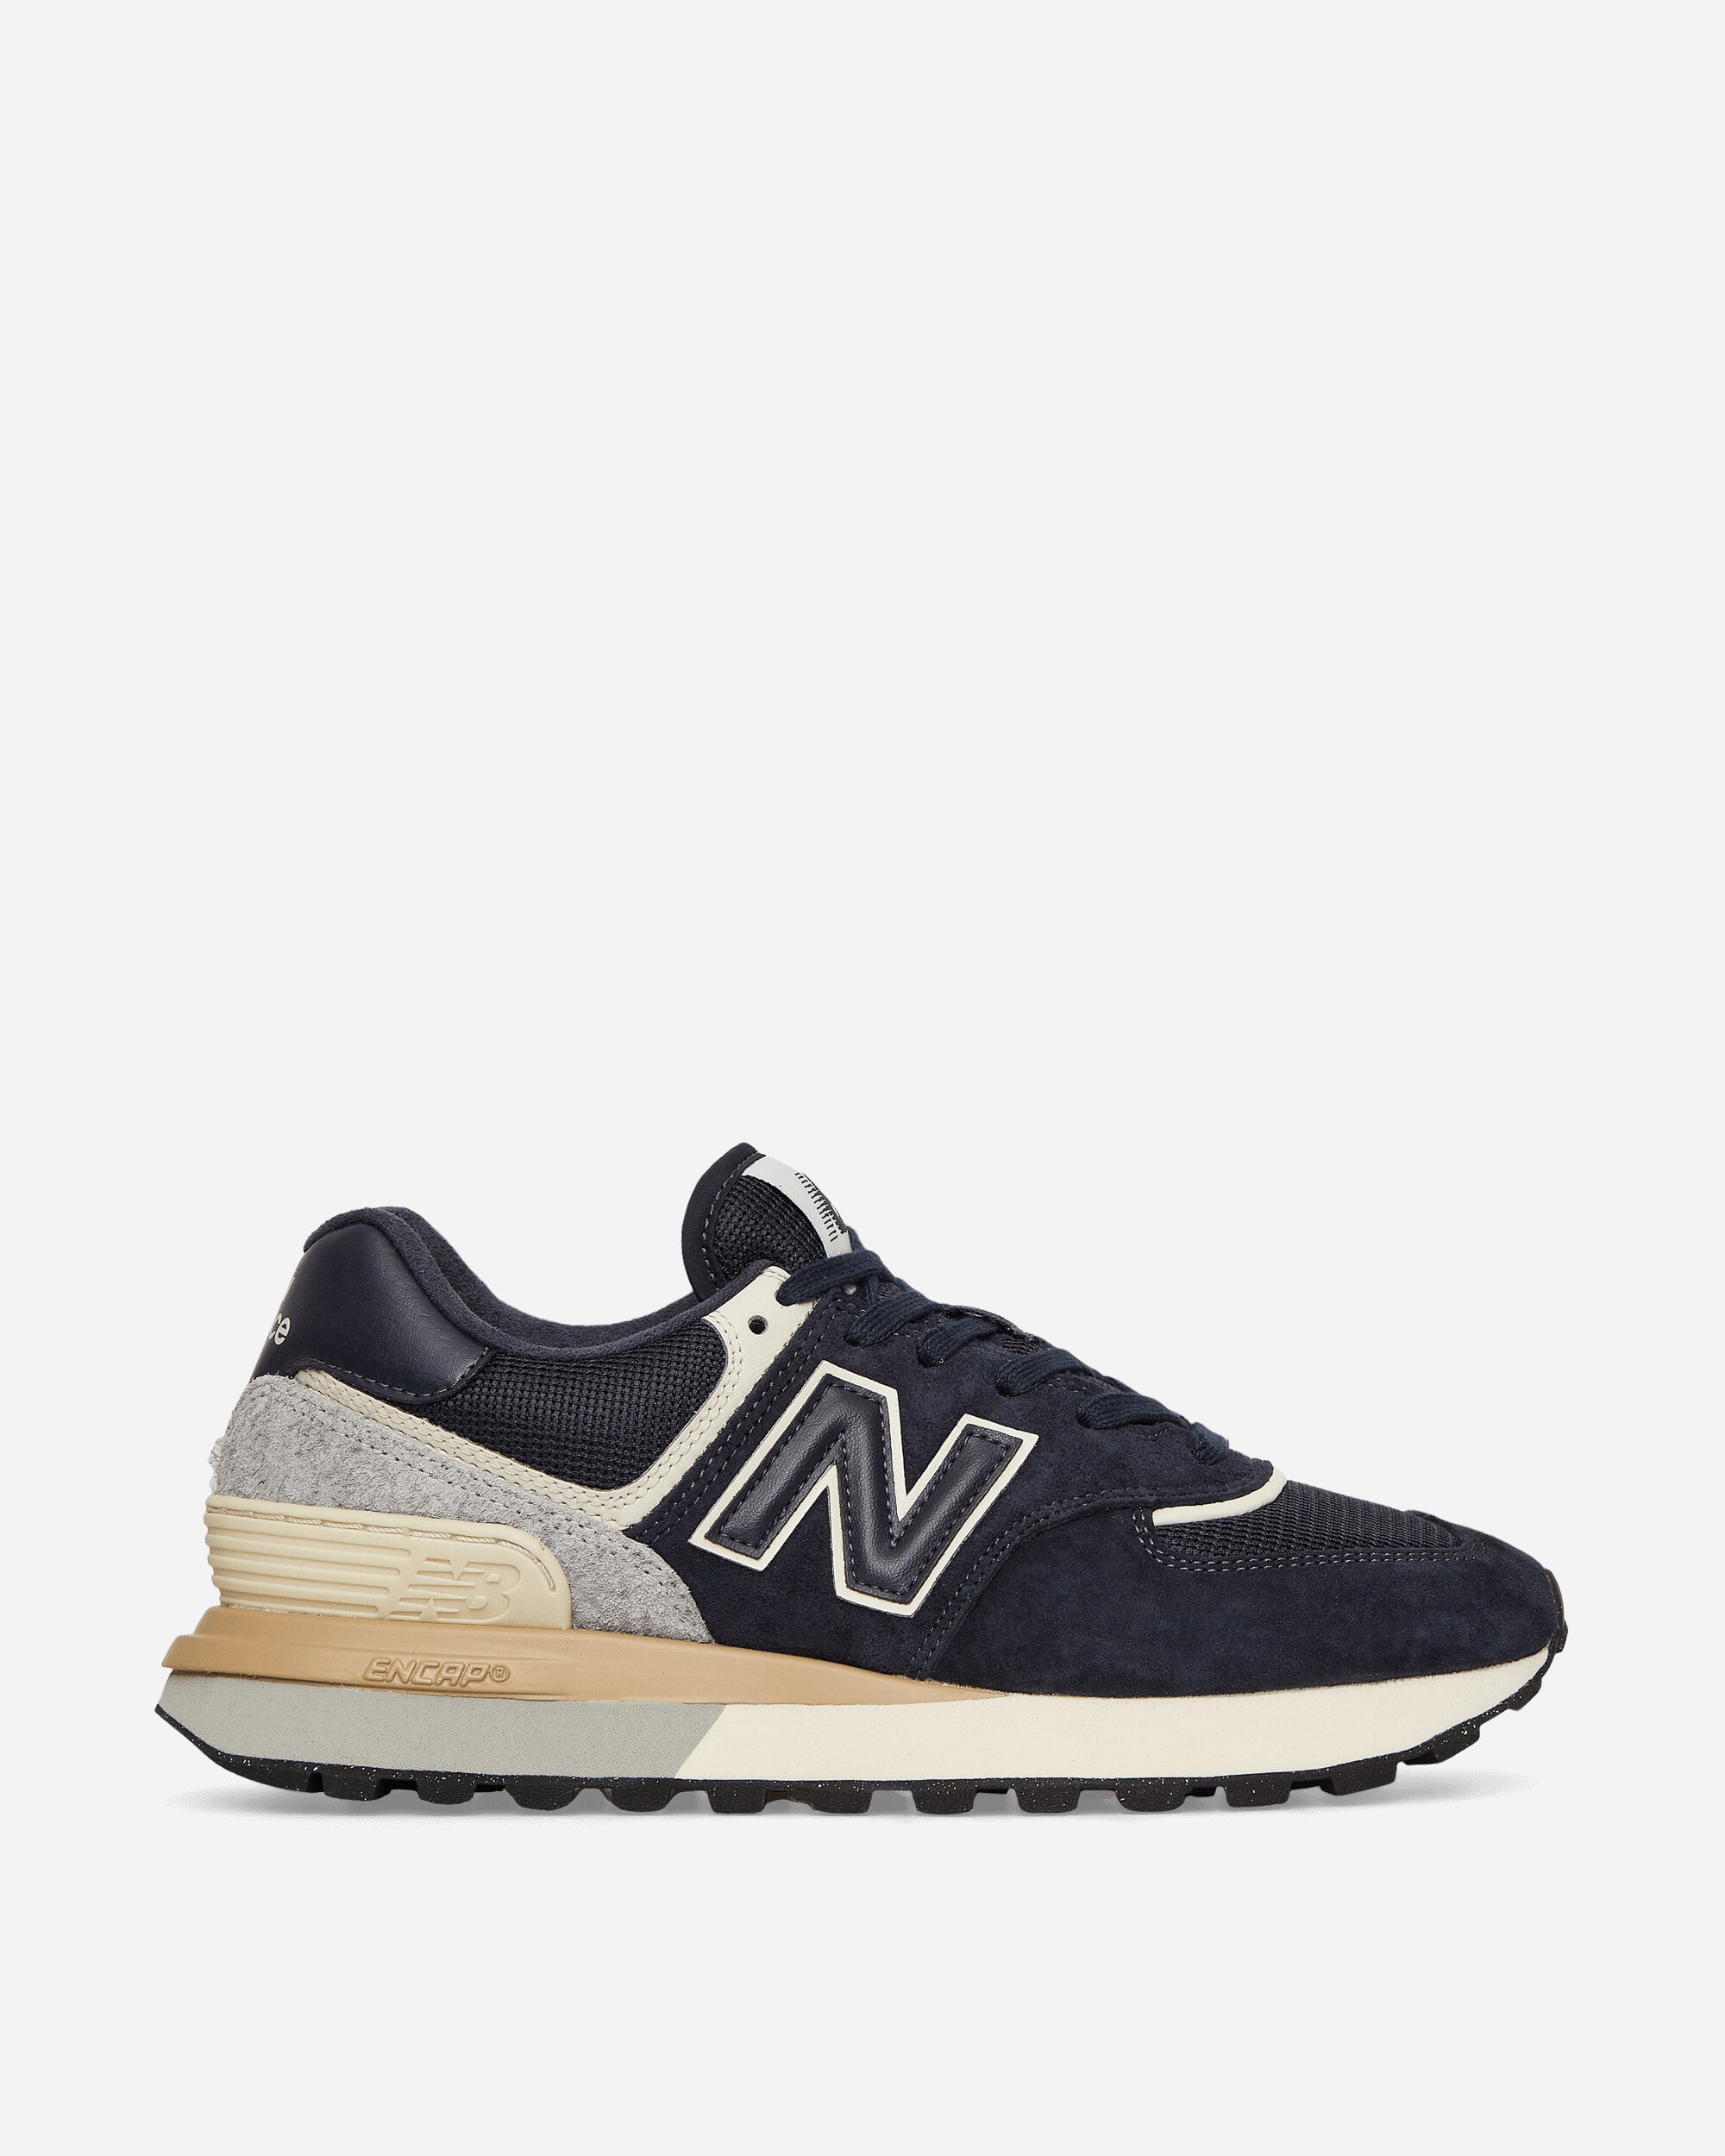 New Balance 574 Sneakers Blue - Jam Official Store